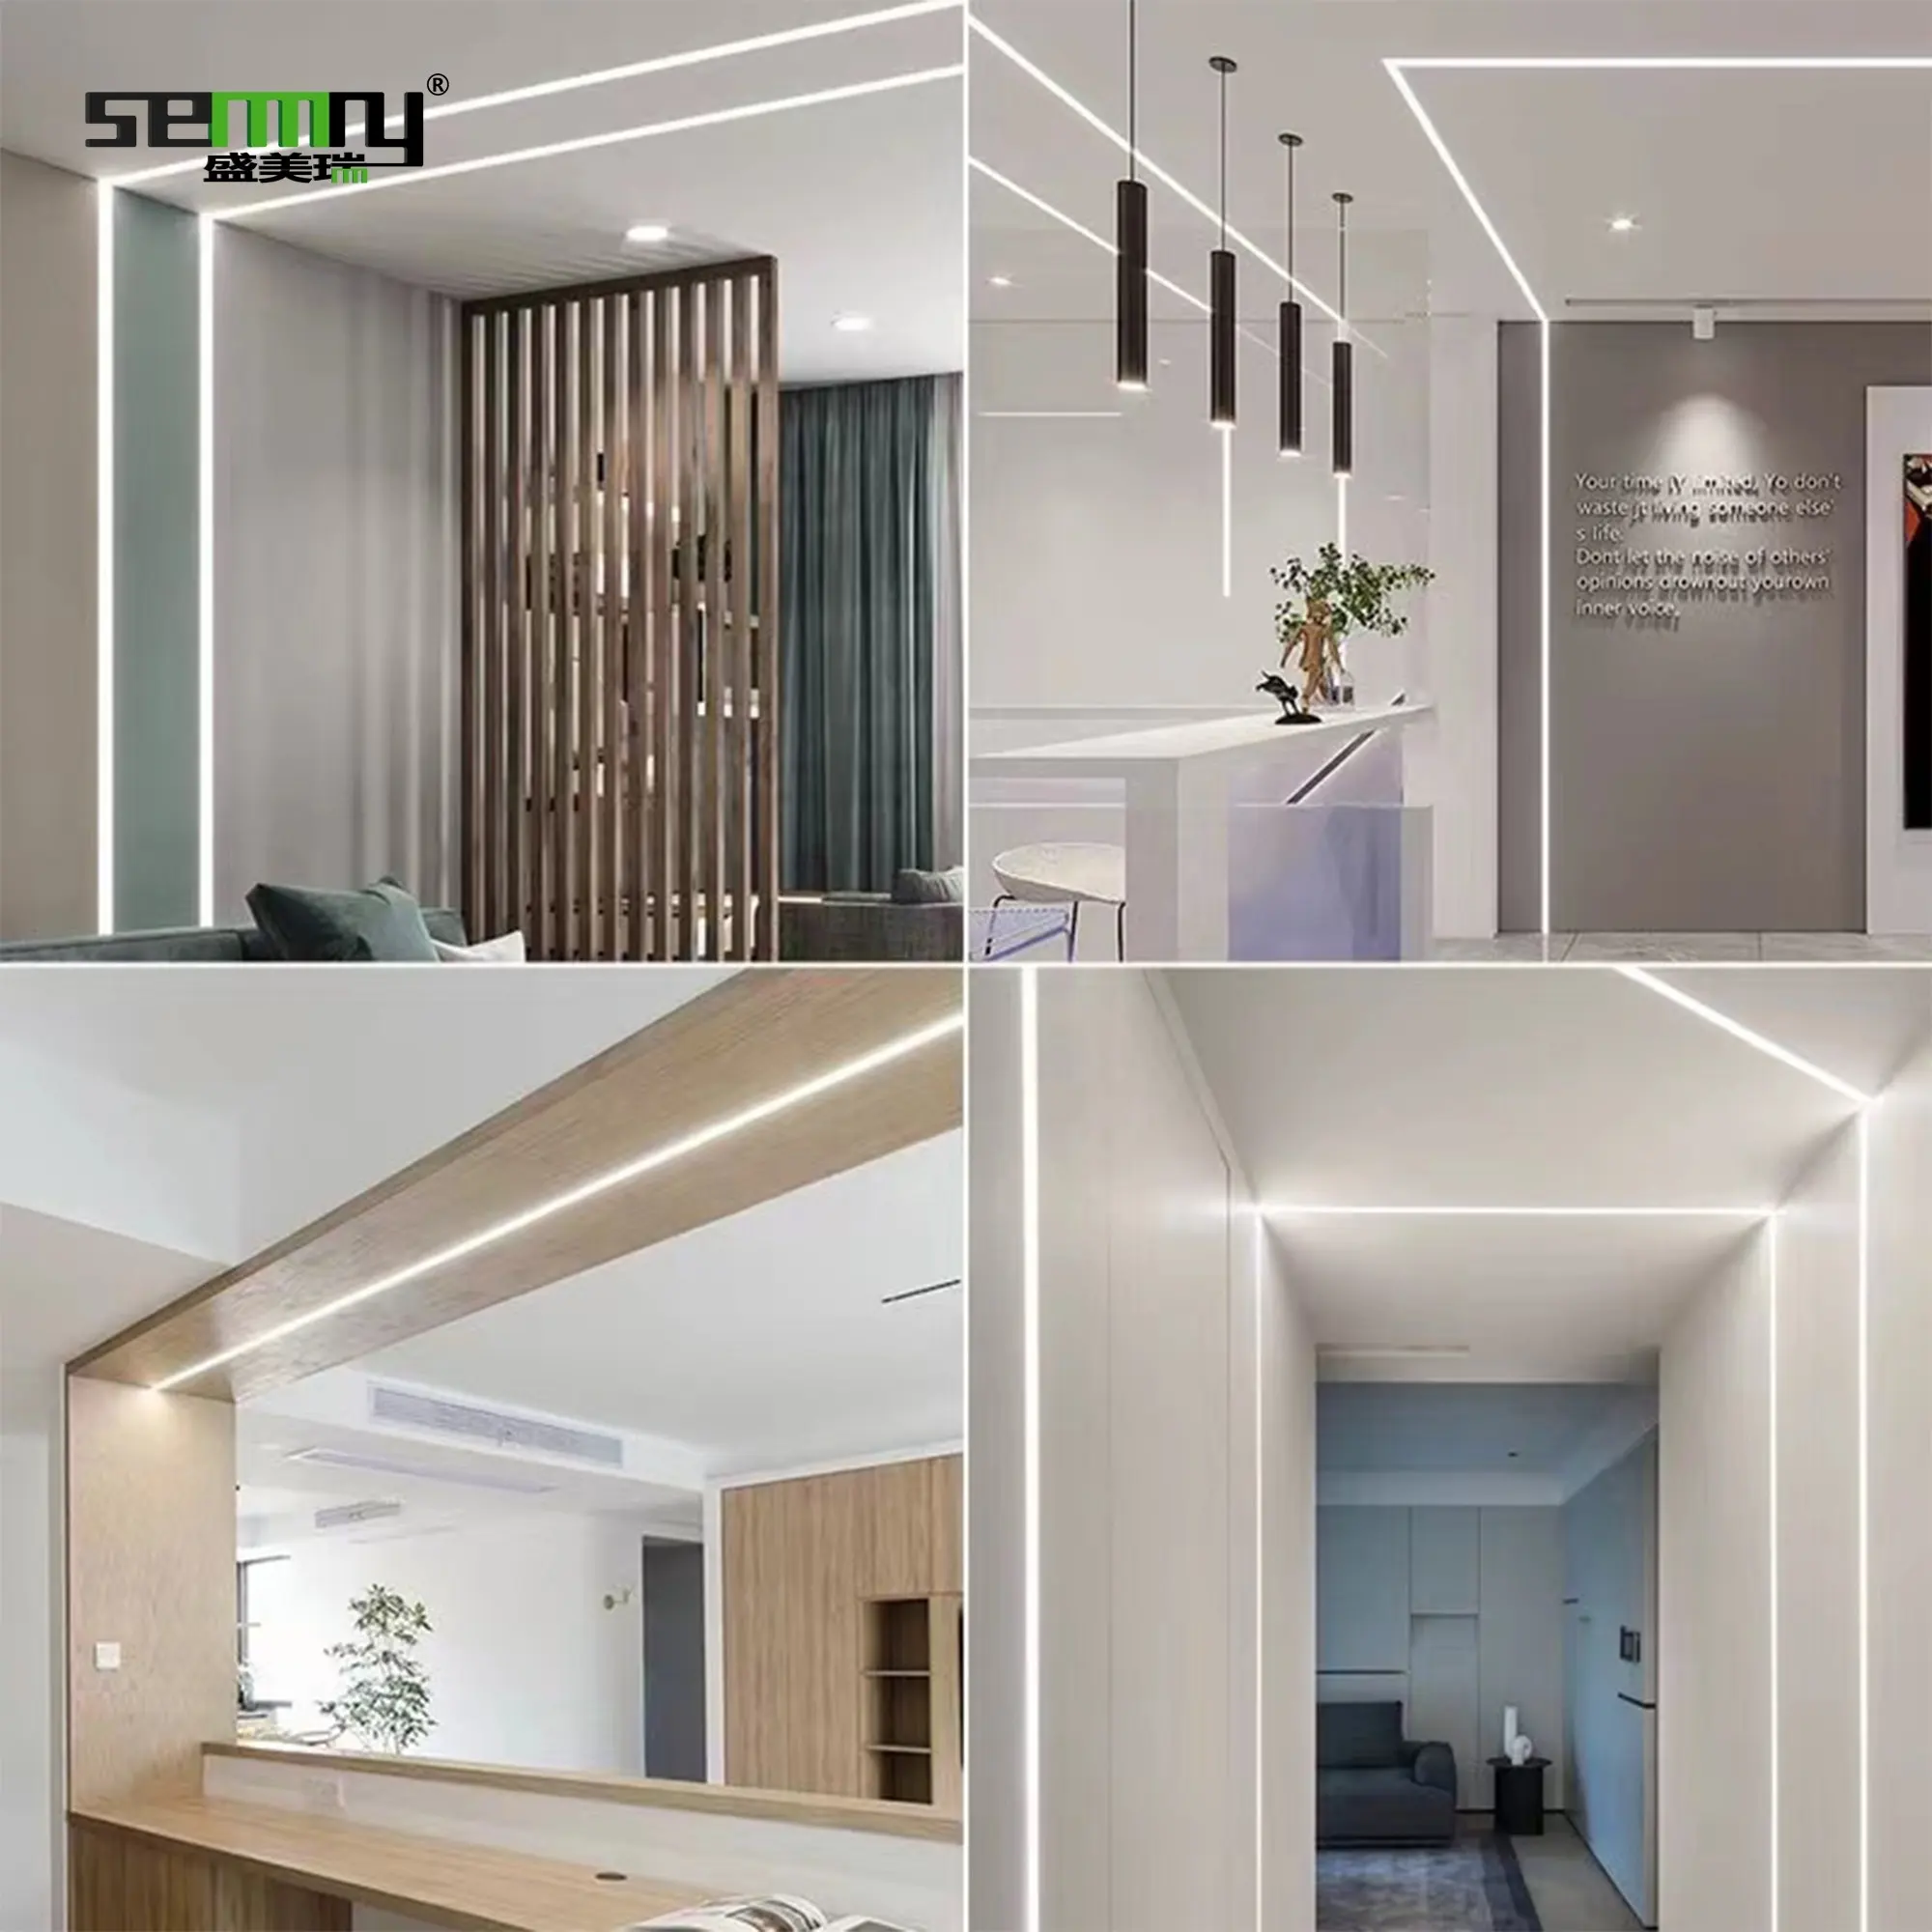 For Ceiling Alu Profil Channel Recessed Architectural Drywall Gypsum Unilateral Plaster in LED Aluminium